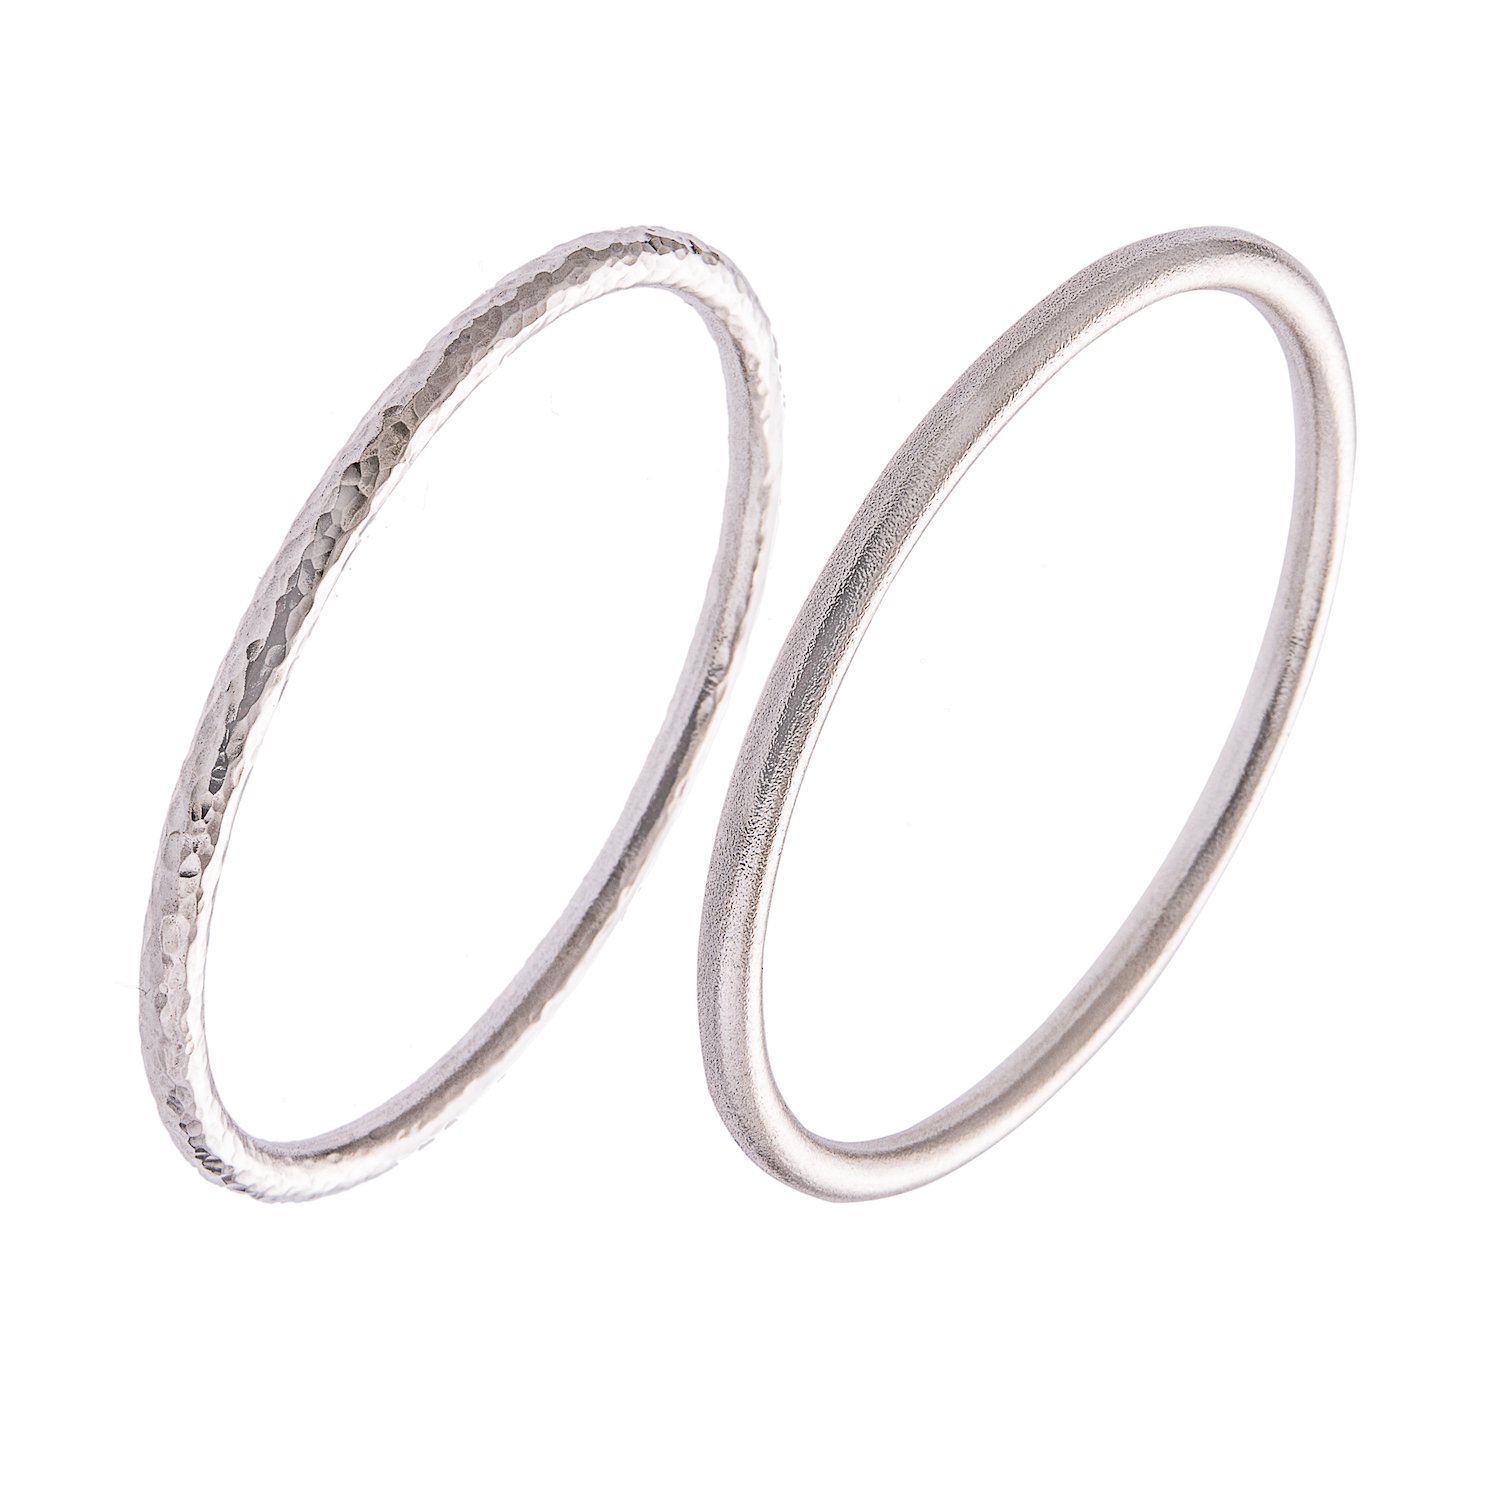 Lucy Thompson Silver Bangles